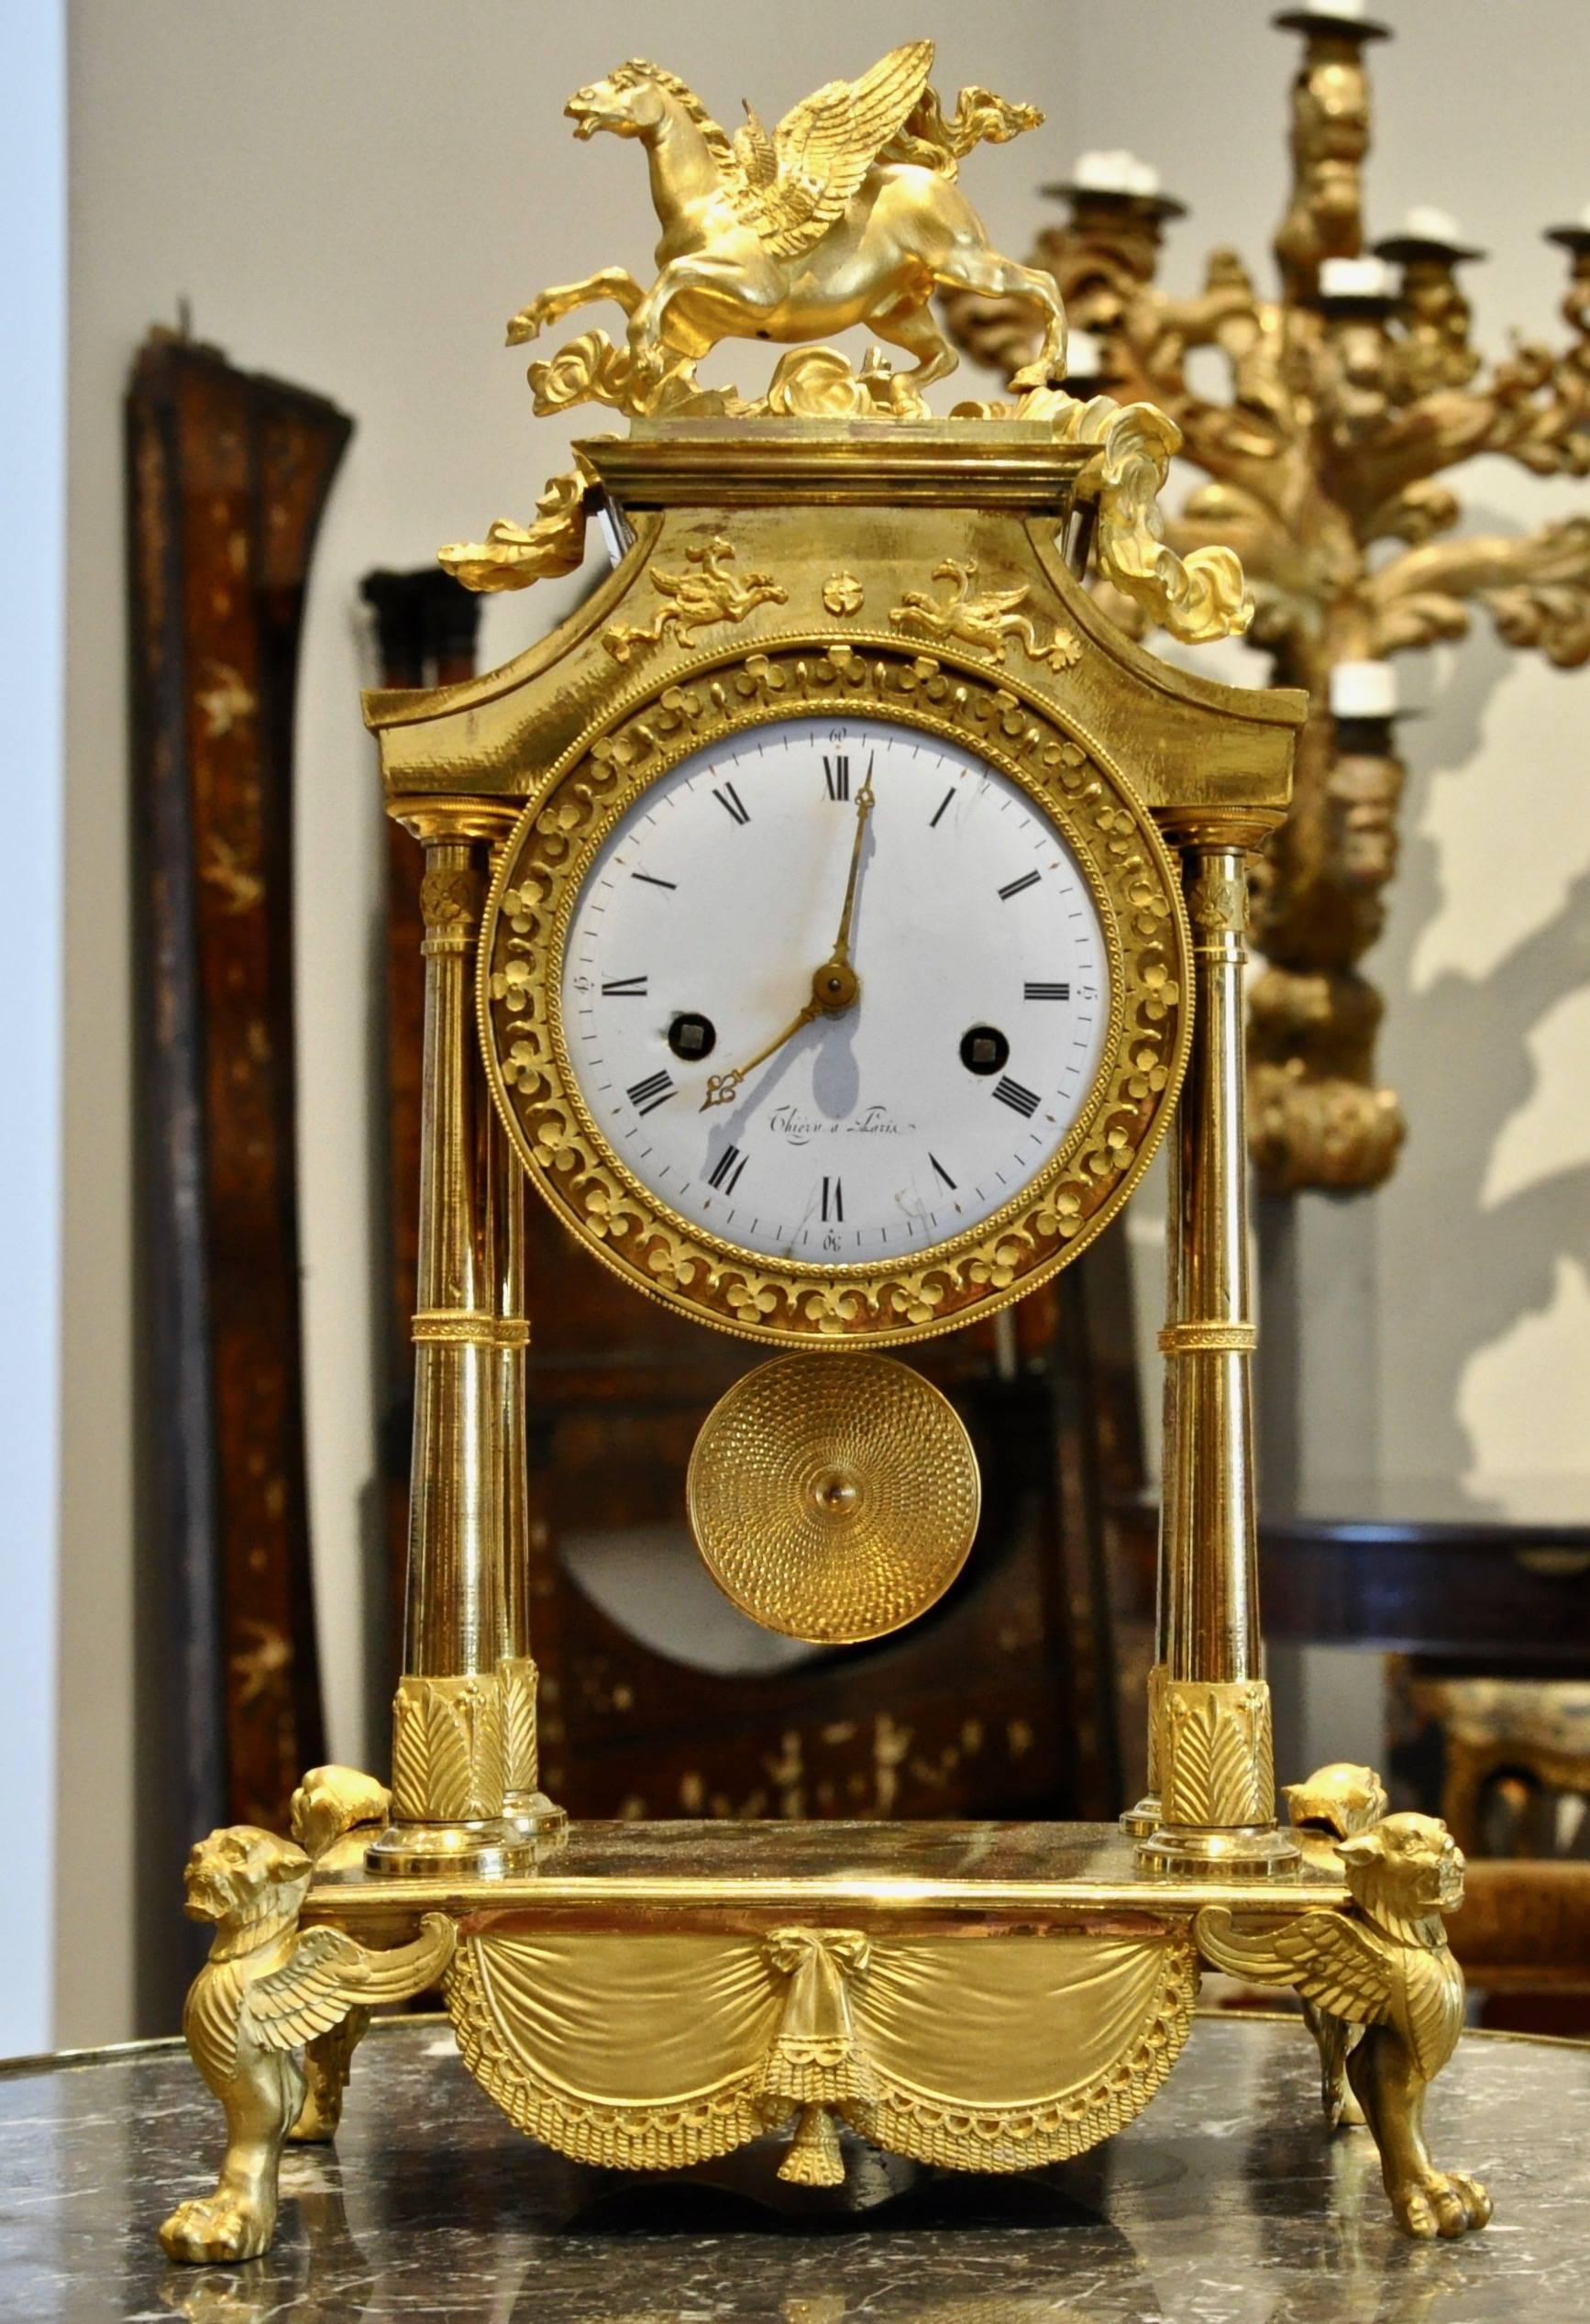 Period French ormolu Director clock with rare Pegasus motif

Neoclassical late 18th century form. Egyptian form columns, Pegasus in clouds, form Monopod Griffin or lion supports
Original works. Gilding in amazing condition

signed 